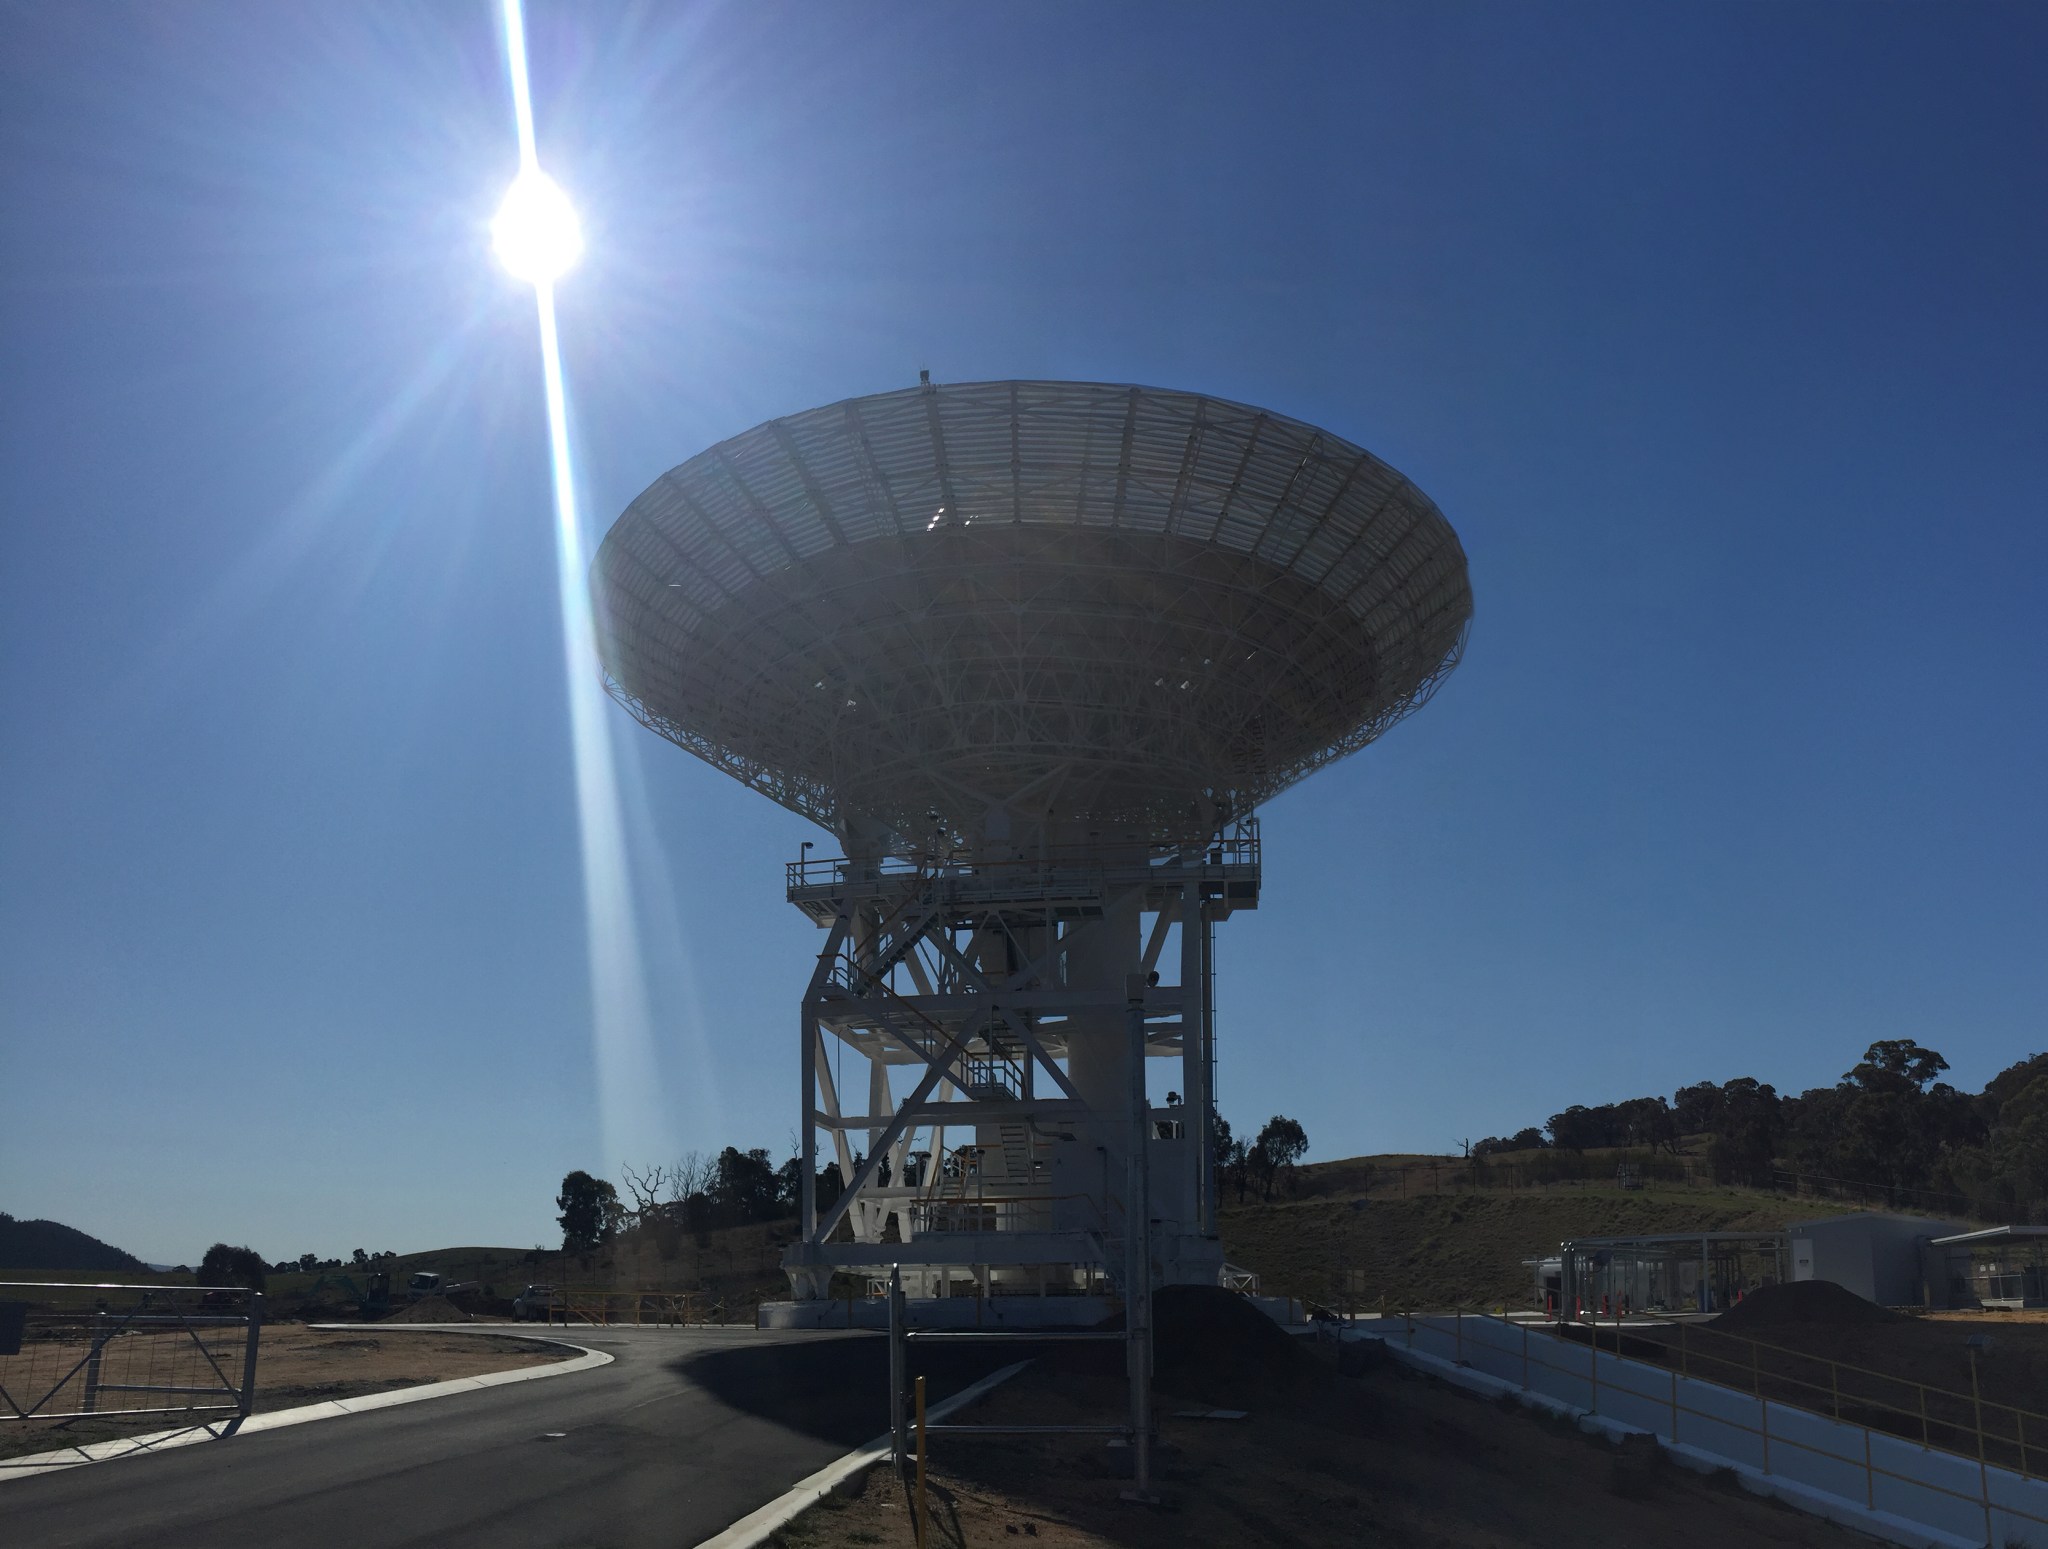 Deep Space Station – 36 (DSS-36) in Canberra, Australia became operational on October 1.